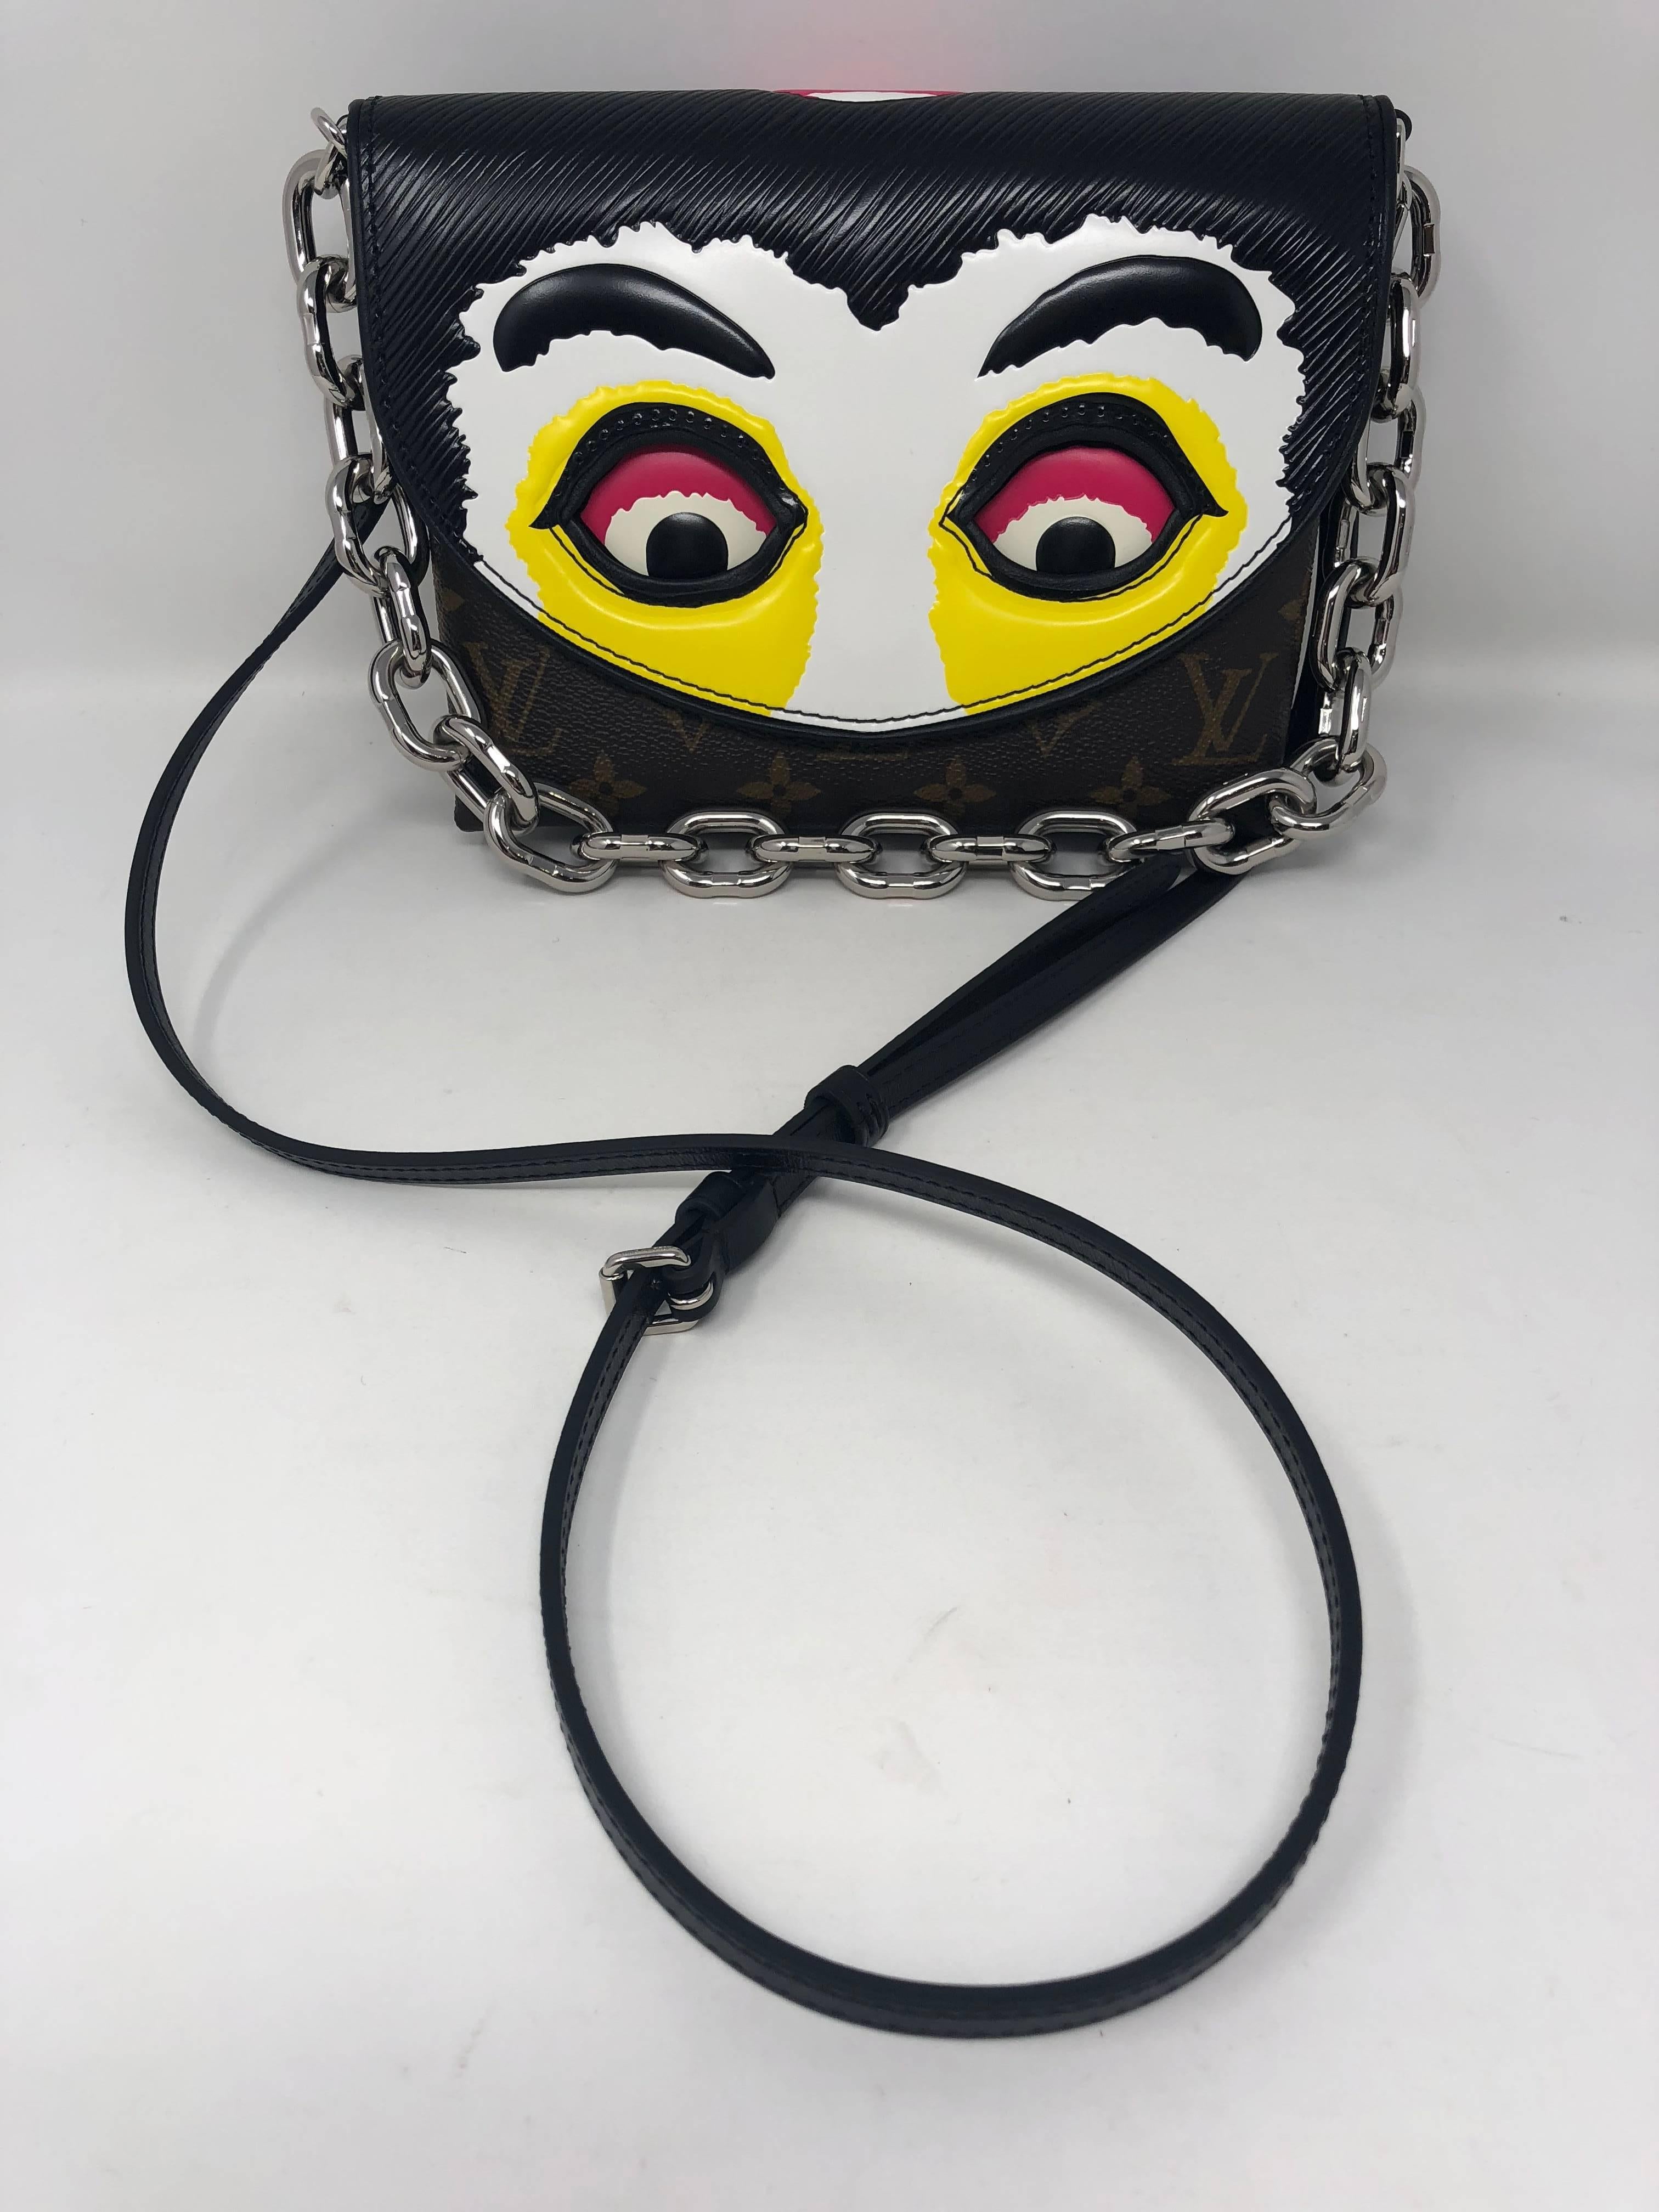 Louis Vuitton Kabuki-themed Cruise 2018 Collection Pochette with additional leather strap. Bag can be worn as a clutch or a crossbody. The Kabuki bag is modeled after Japanese traditional theatrical masks. They are art pieces as well as wearable.